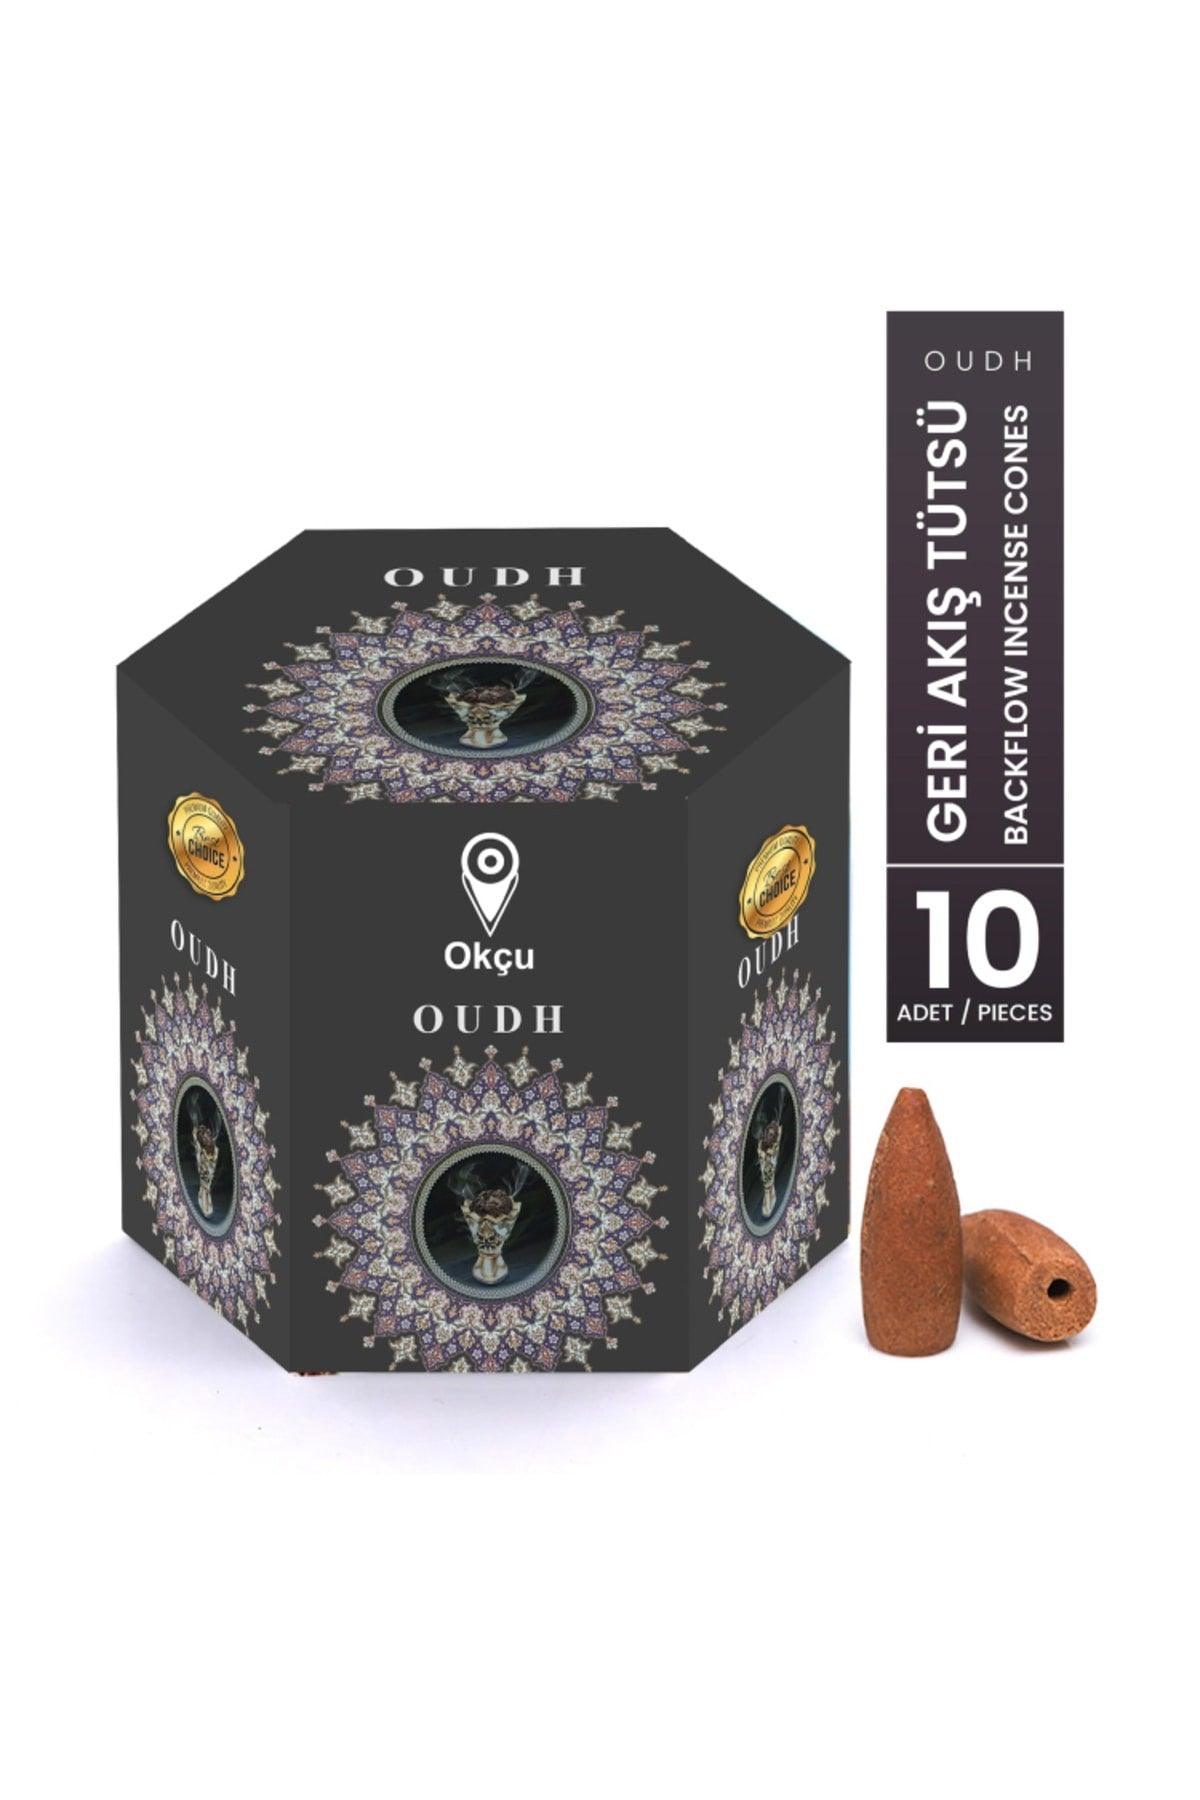 Oudh Backflow Incense Waterfall Conical Backflow Incense Cones 10 Pcs/Pieces - Swordslife